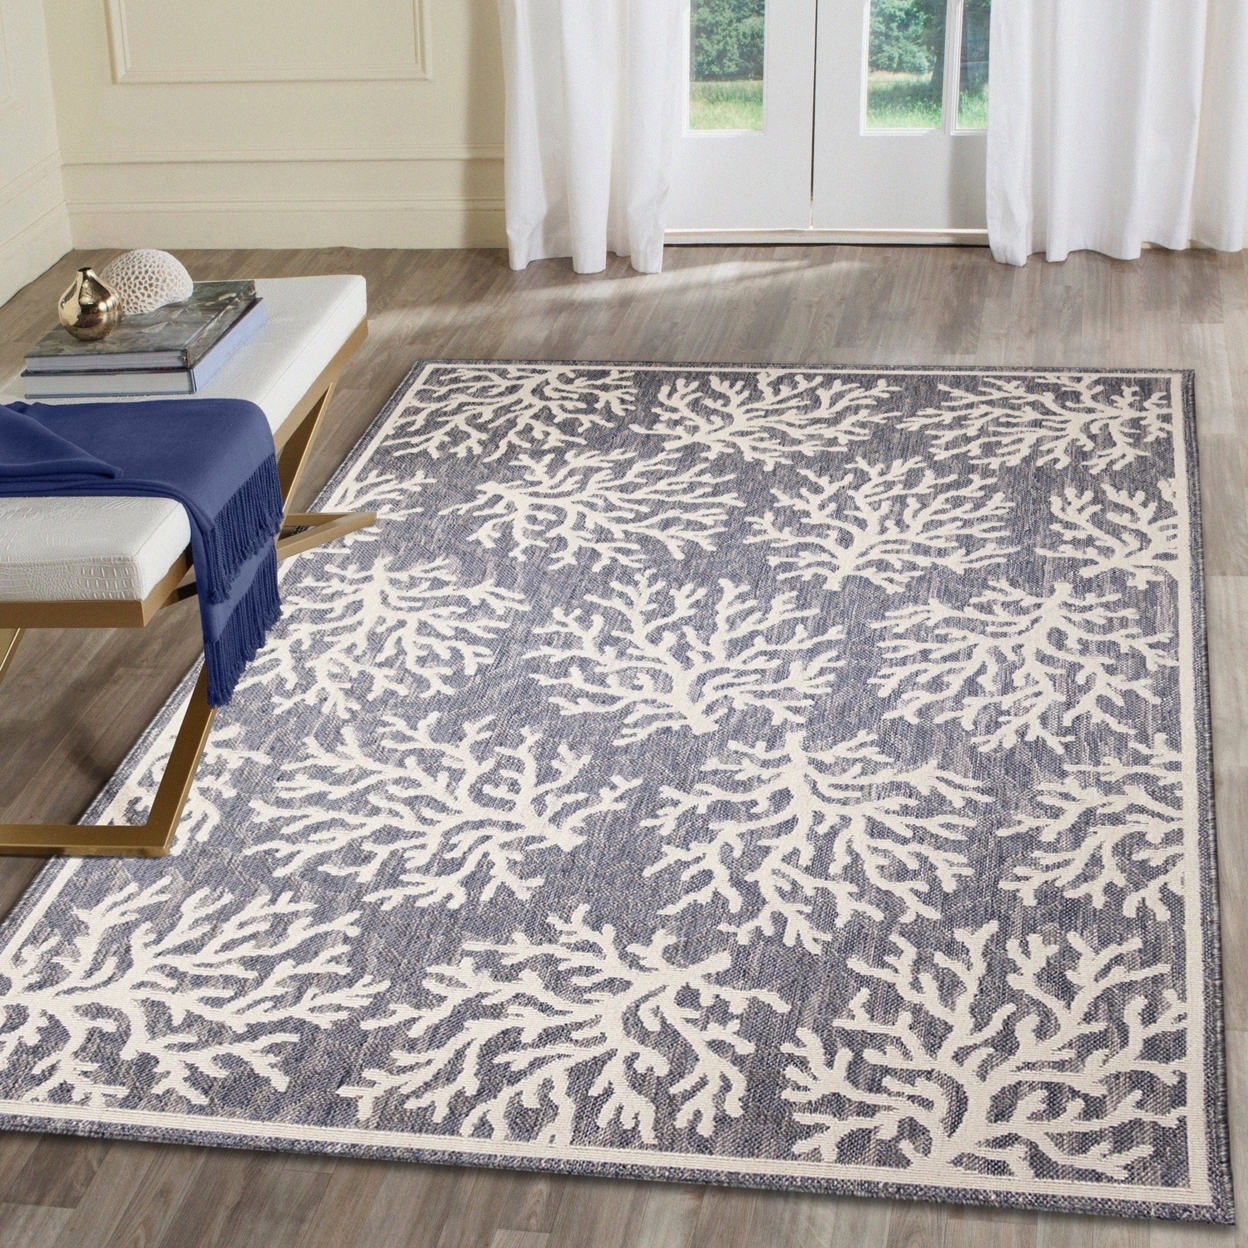 Liora Manne Cove Coral Indoor Outdoor Area Rug Blue - 1'11 X 7'6